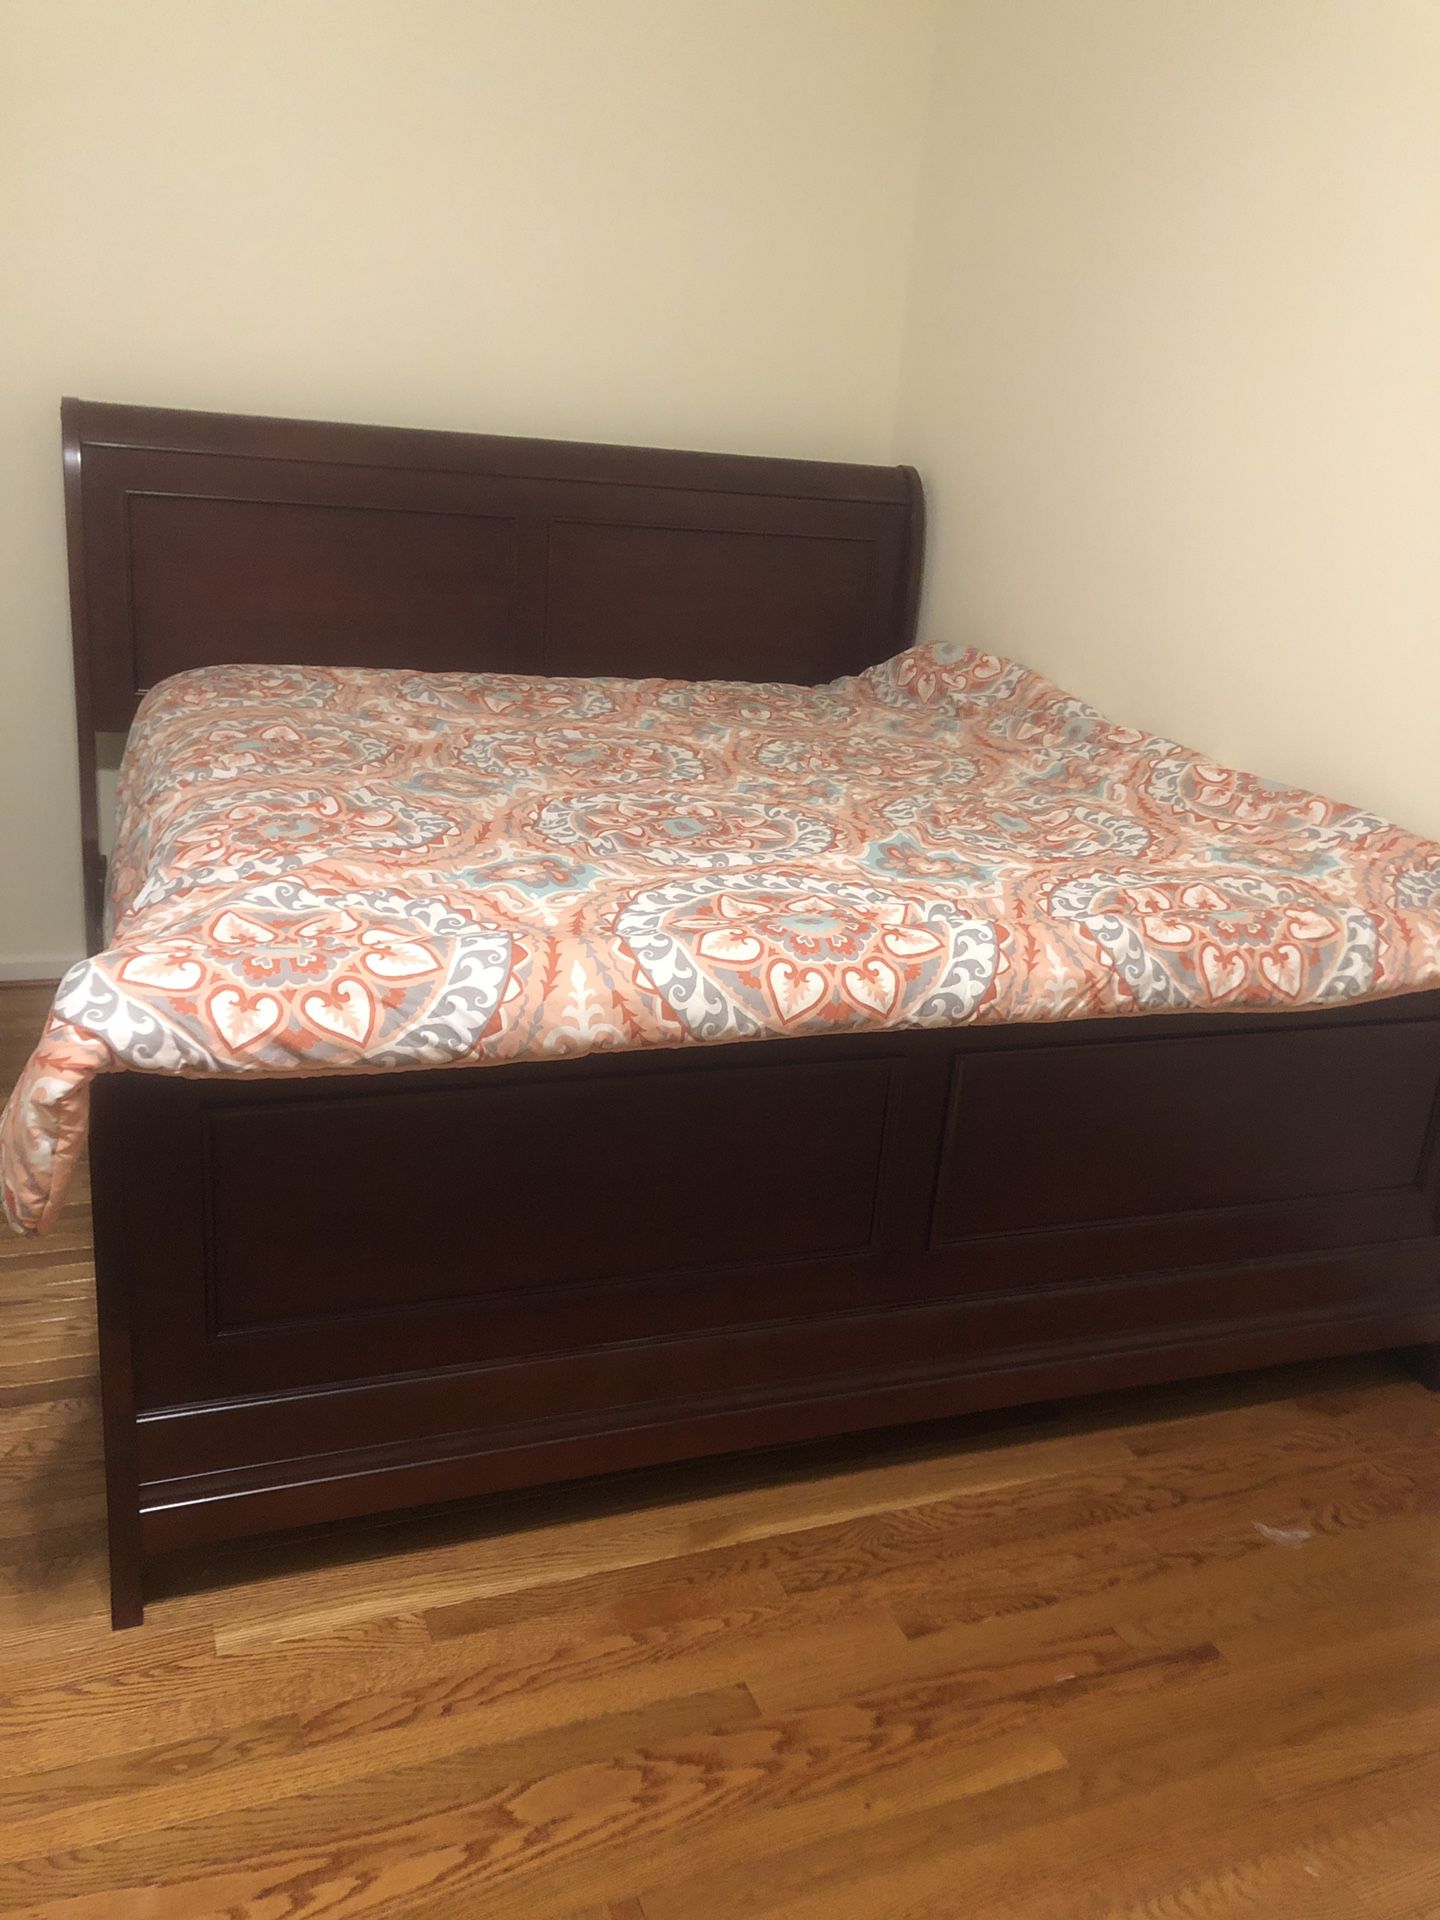 King size bed frame only